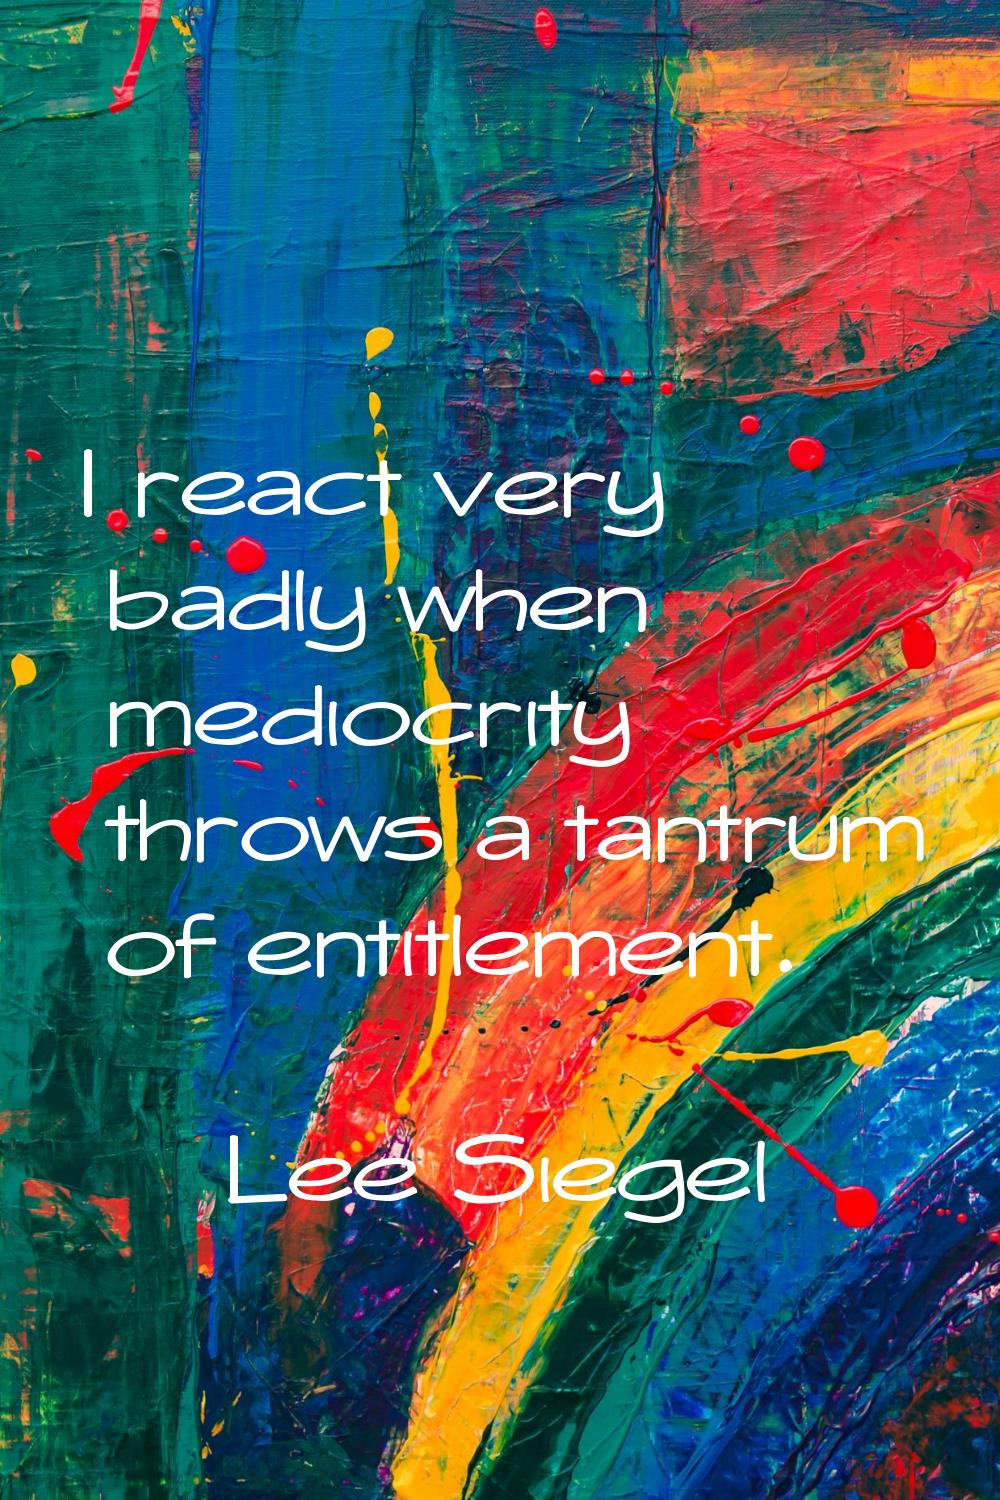 I react very badly when mediocrity throws a tantrum of entitlement.